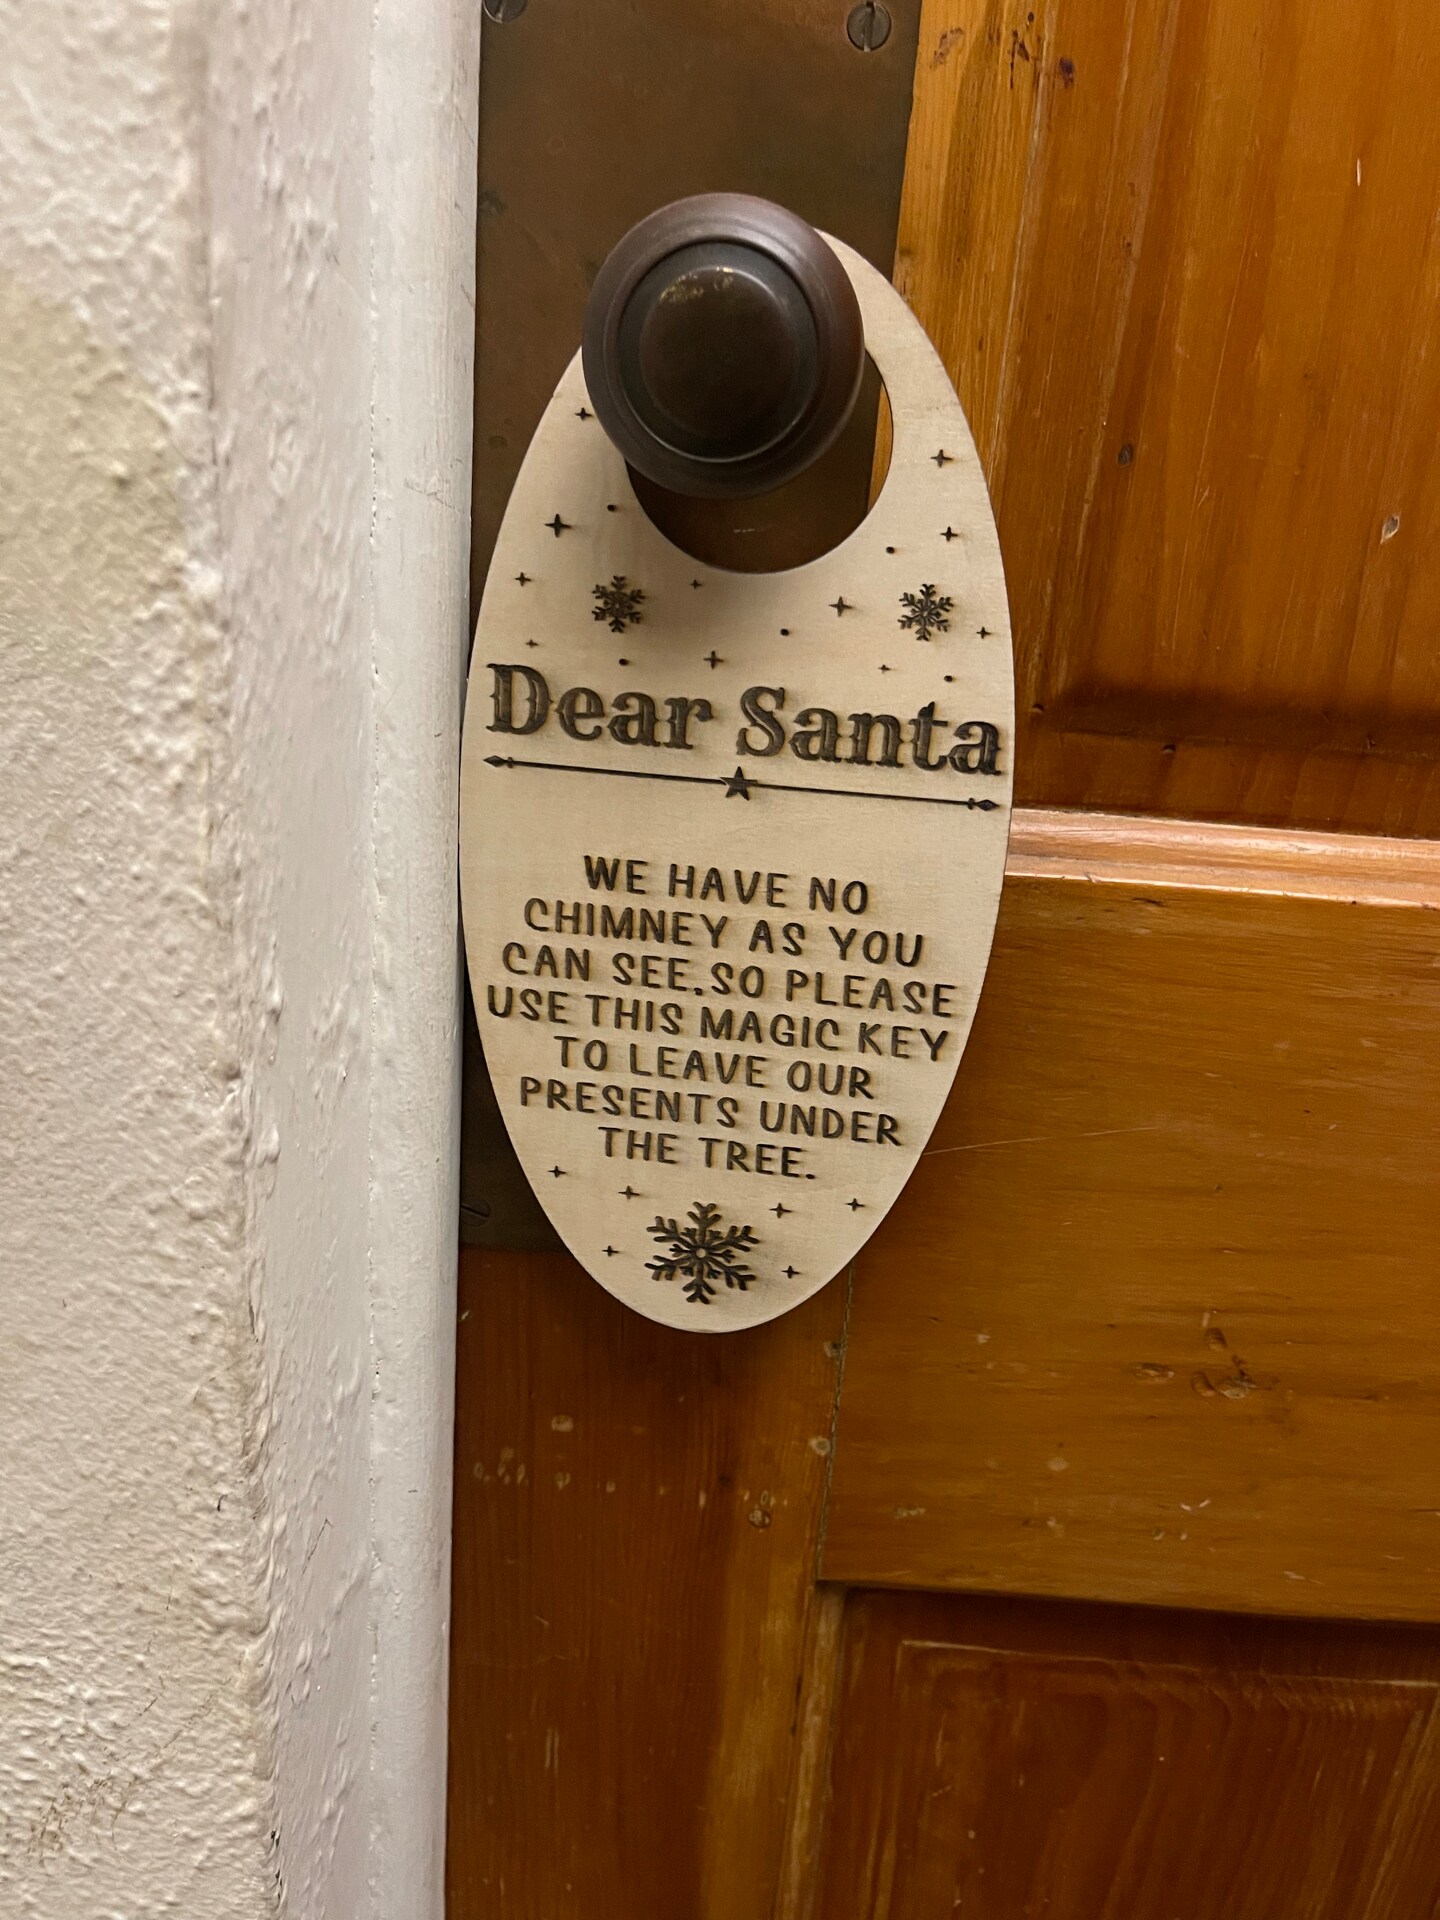 Santa's Key For House With No Chimney Ornament, Christmas Ornament